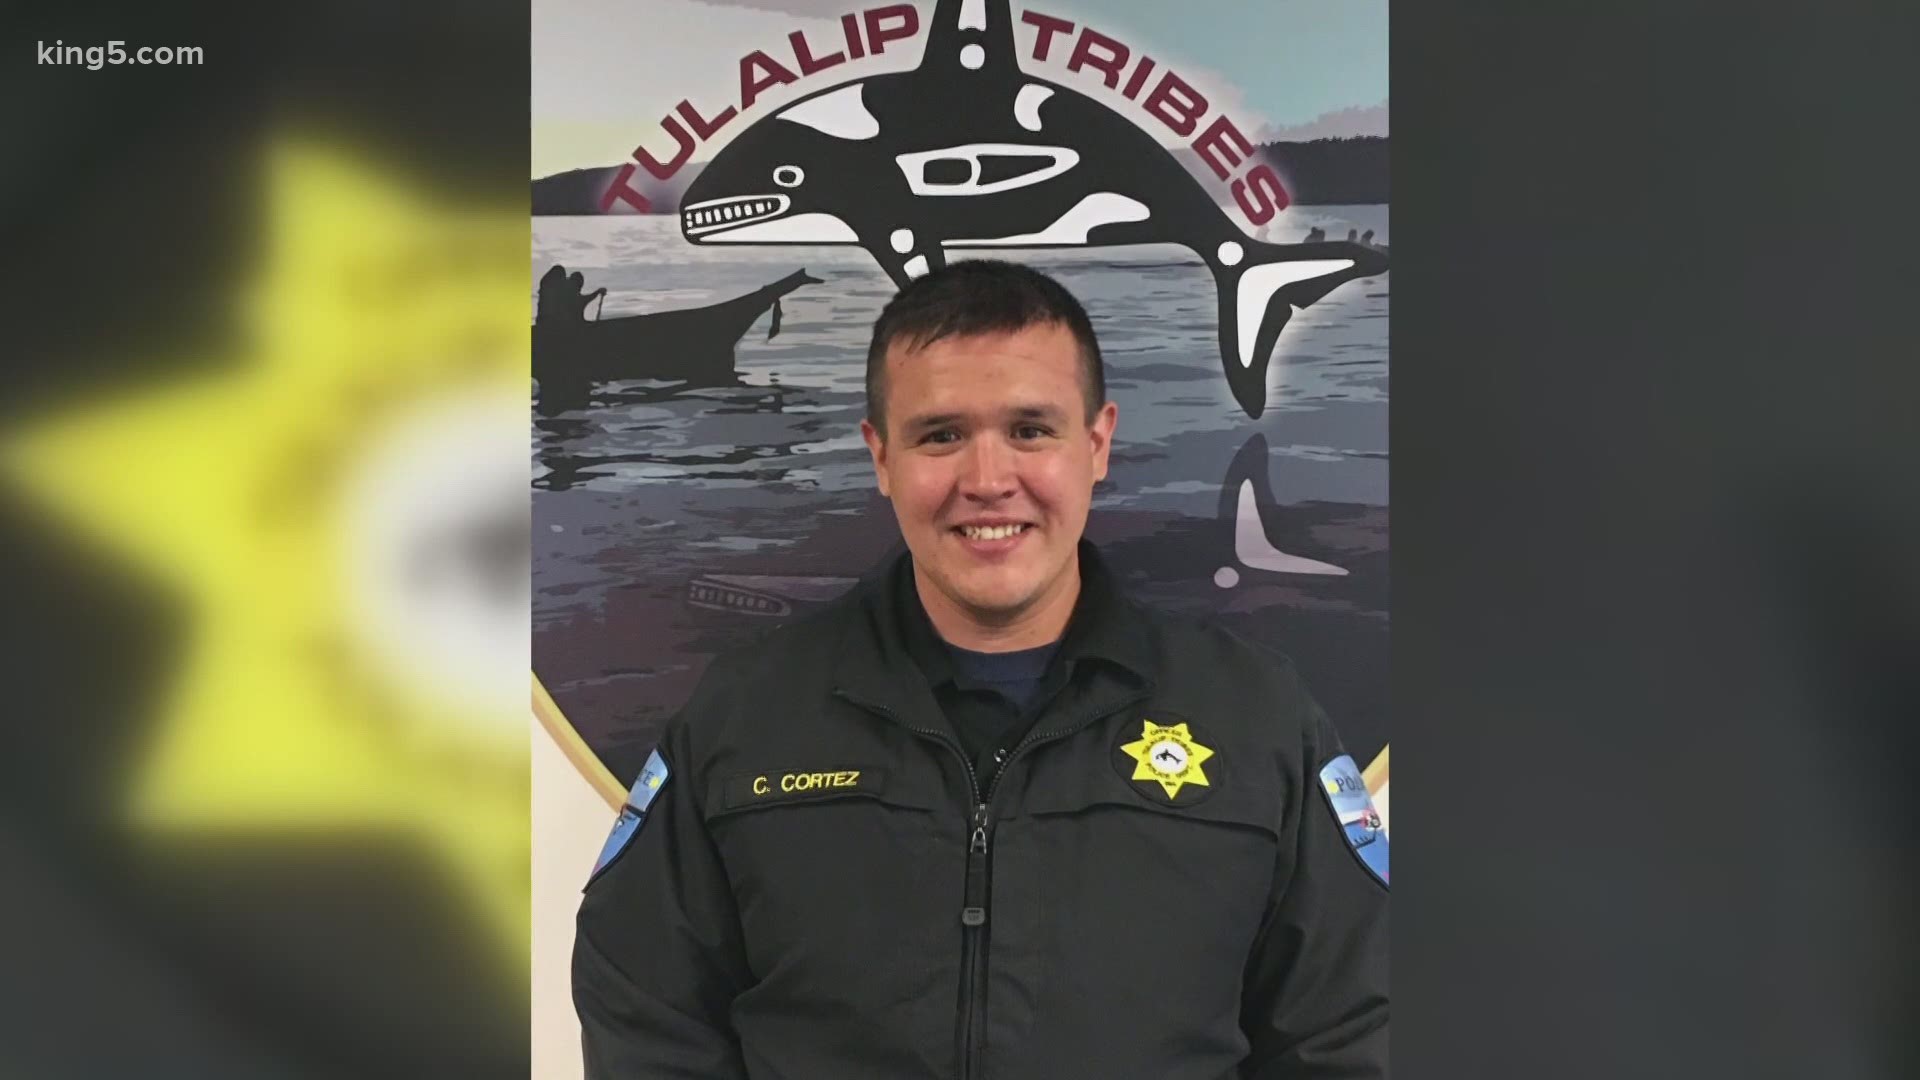 The Tulalip Tribe continues to search for Officer Charlie Cortez after a large wave capsized his Fish and Wildlife boat on Nov. 17, 2020.